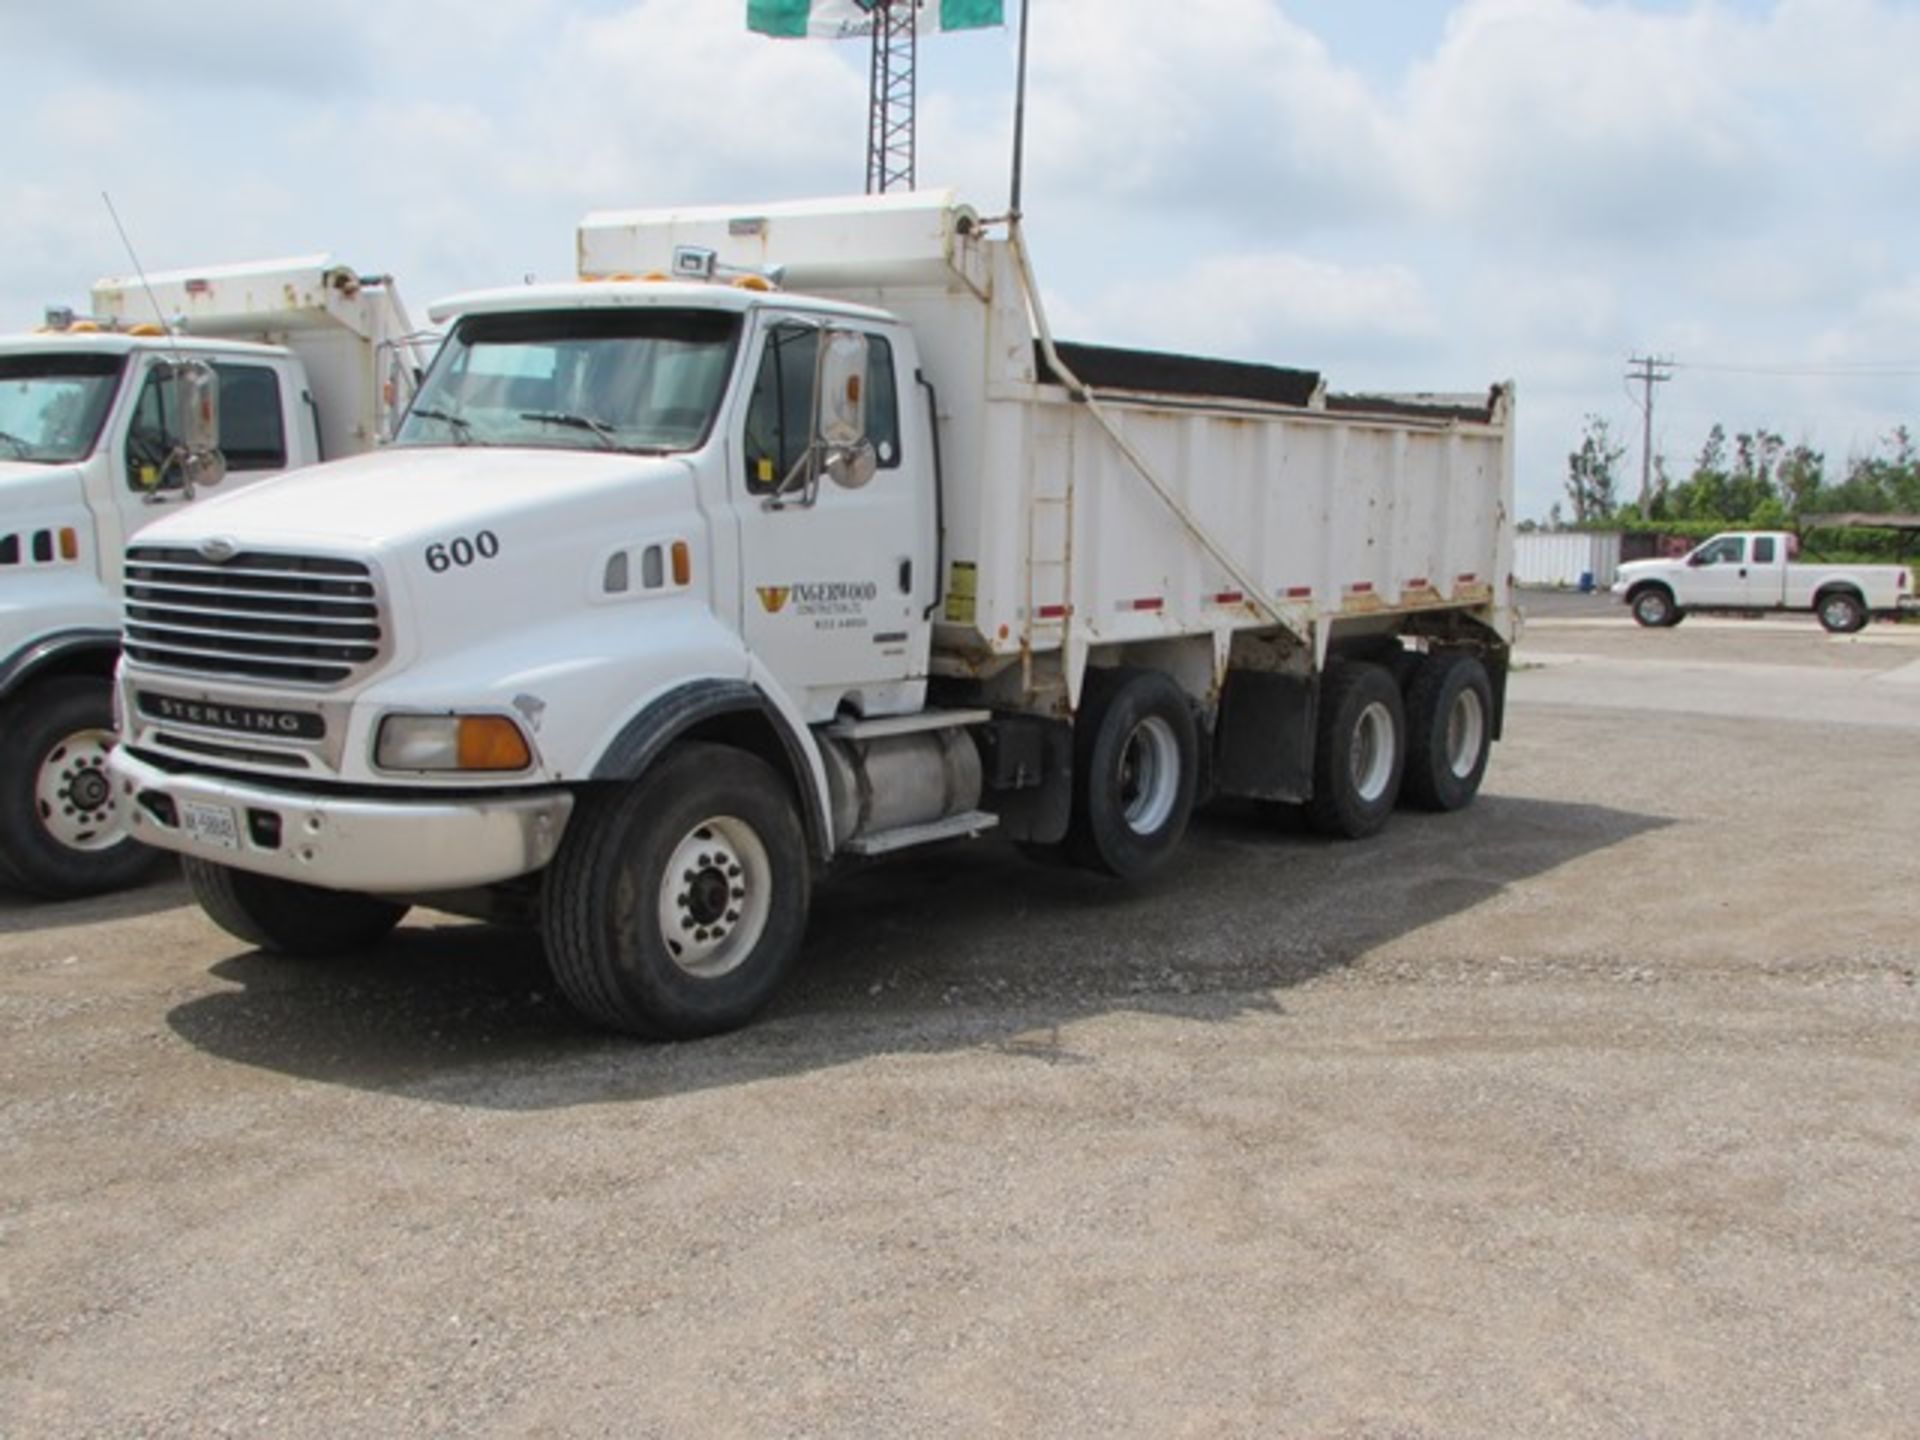 2001 Sterling tri axle dump truck c/w Eaton Fuller 18-speed transmission, odometer reading: 591, - Image 4 of 7